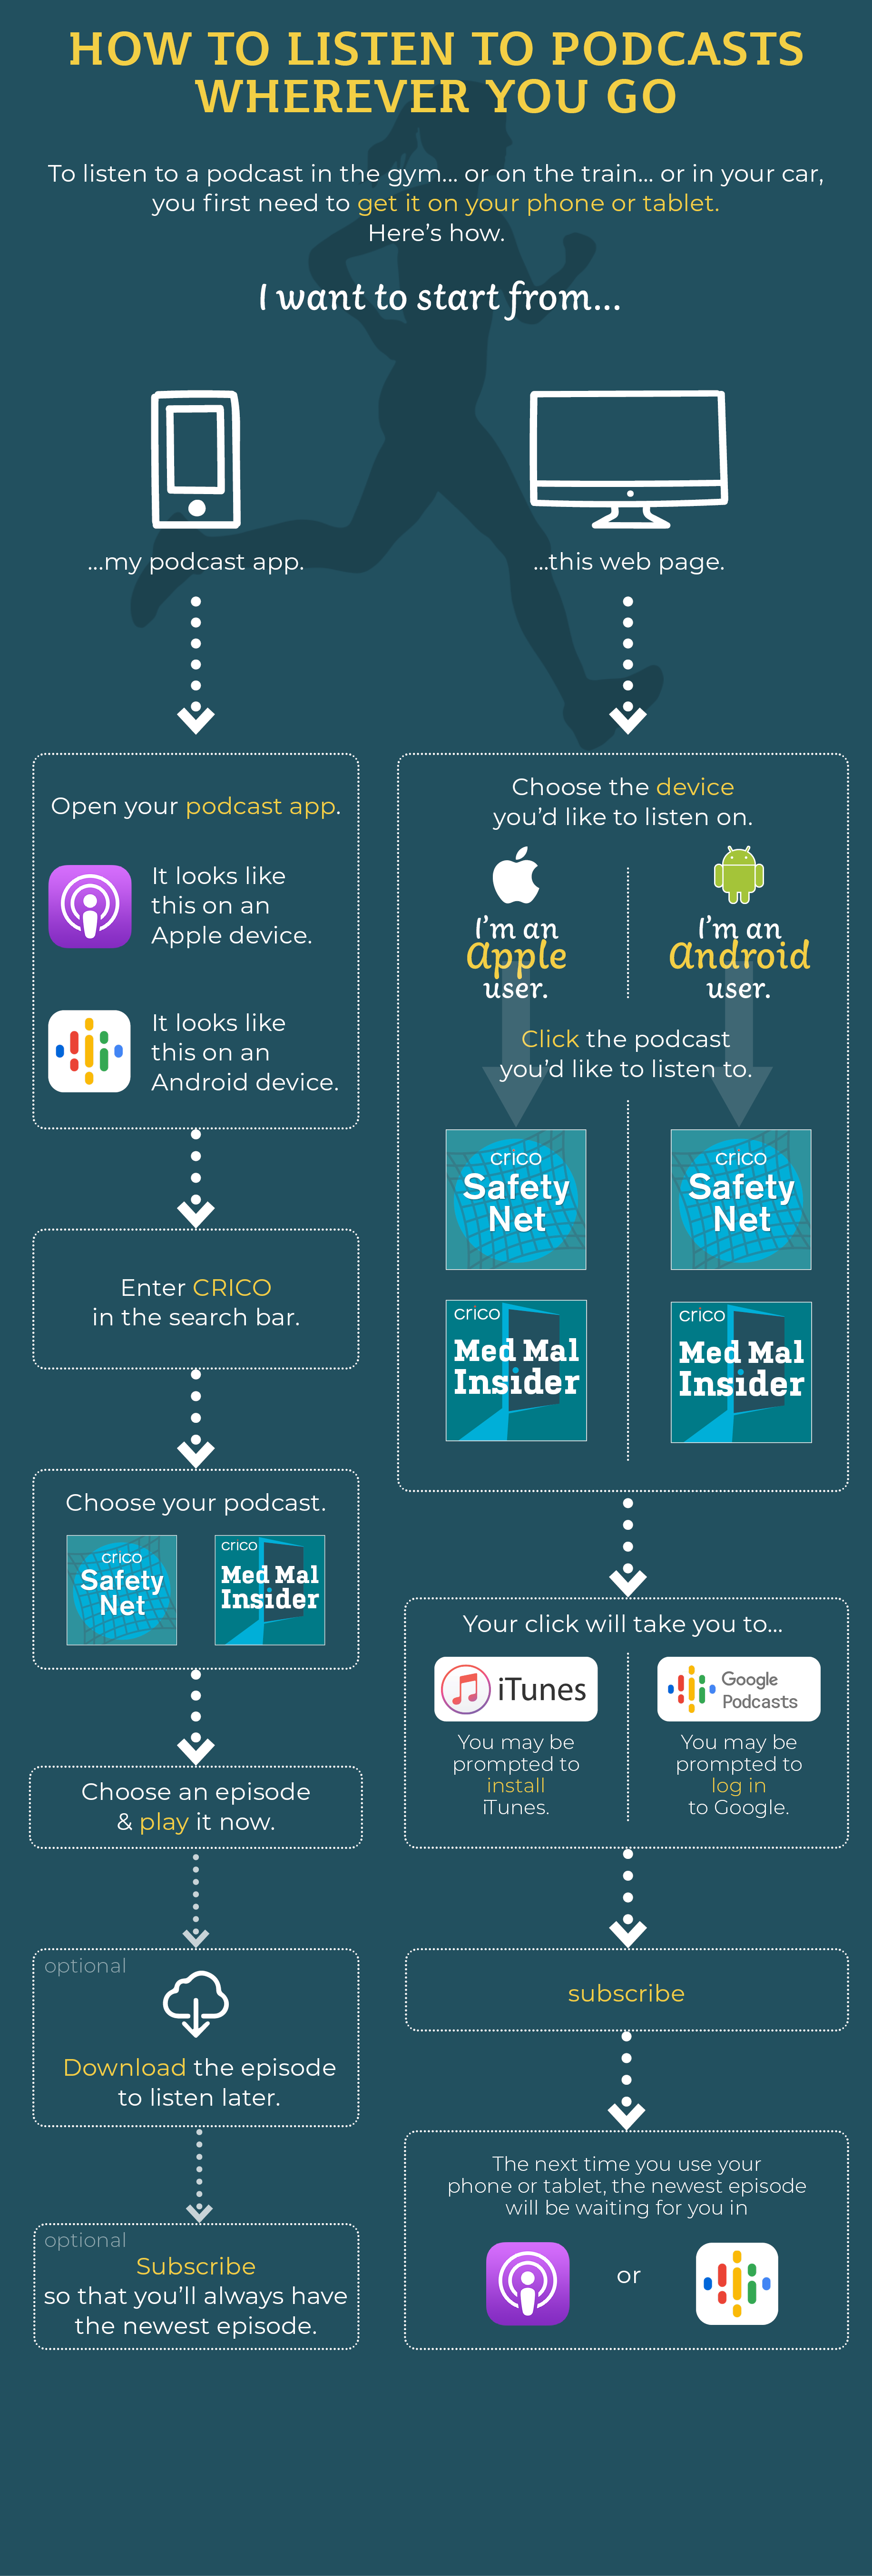 Infographic for how to listen to podcasts on phones and tablets. A text version is included below.